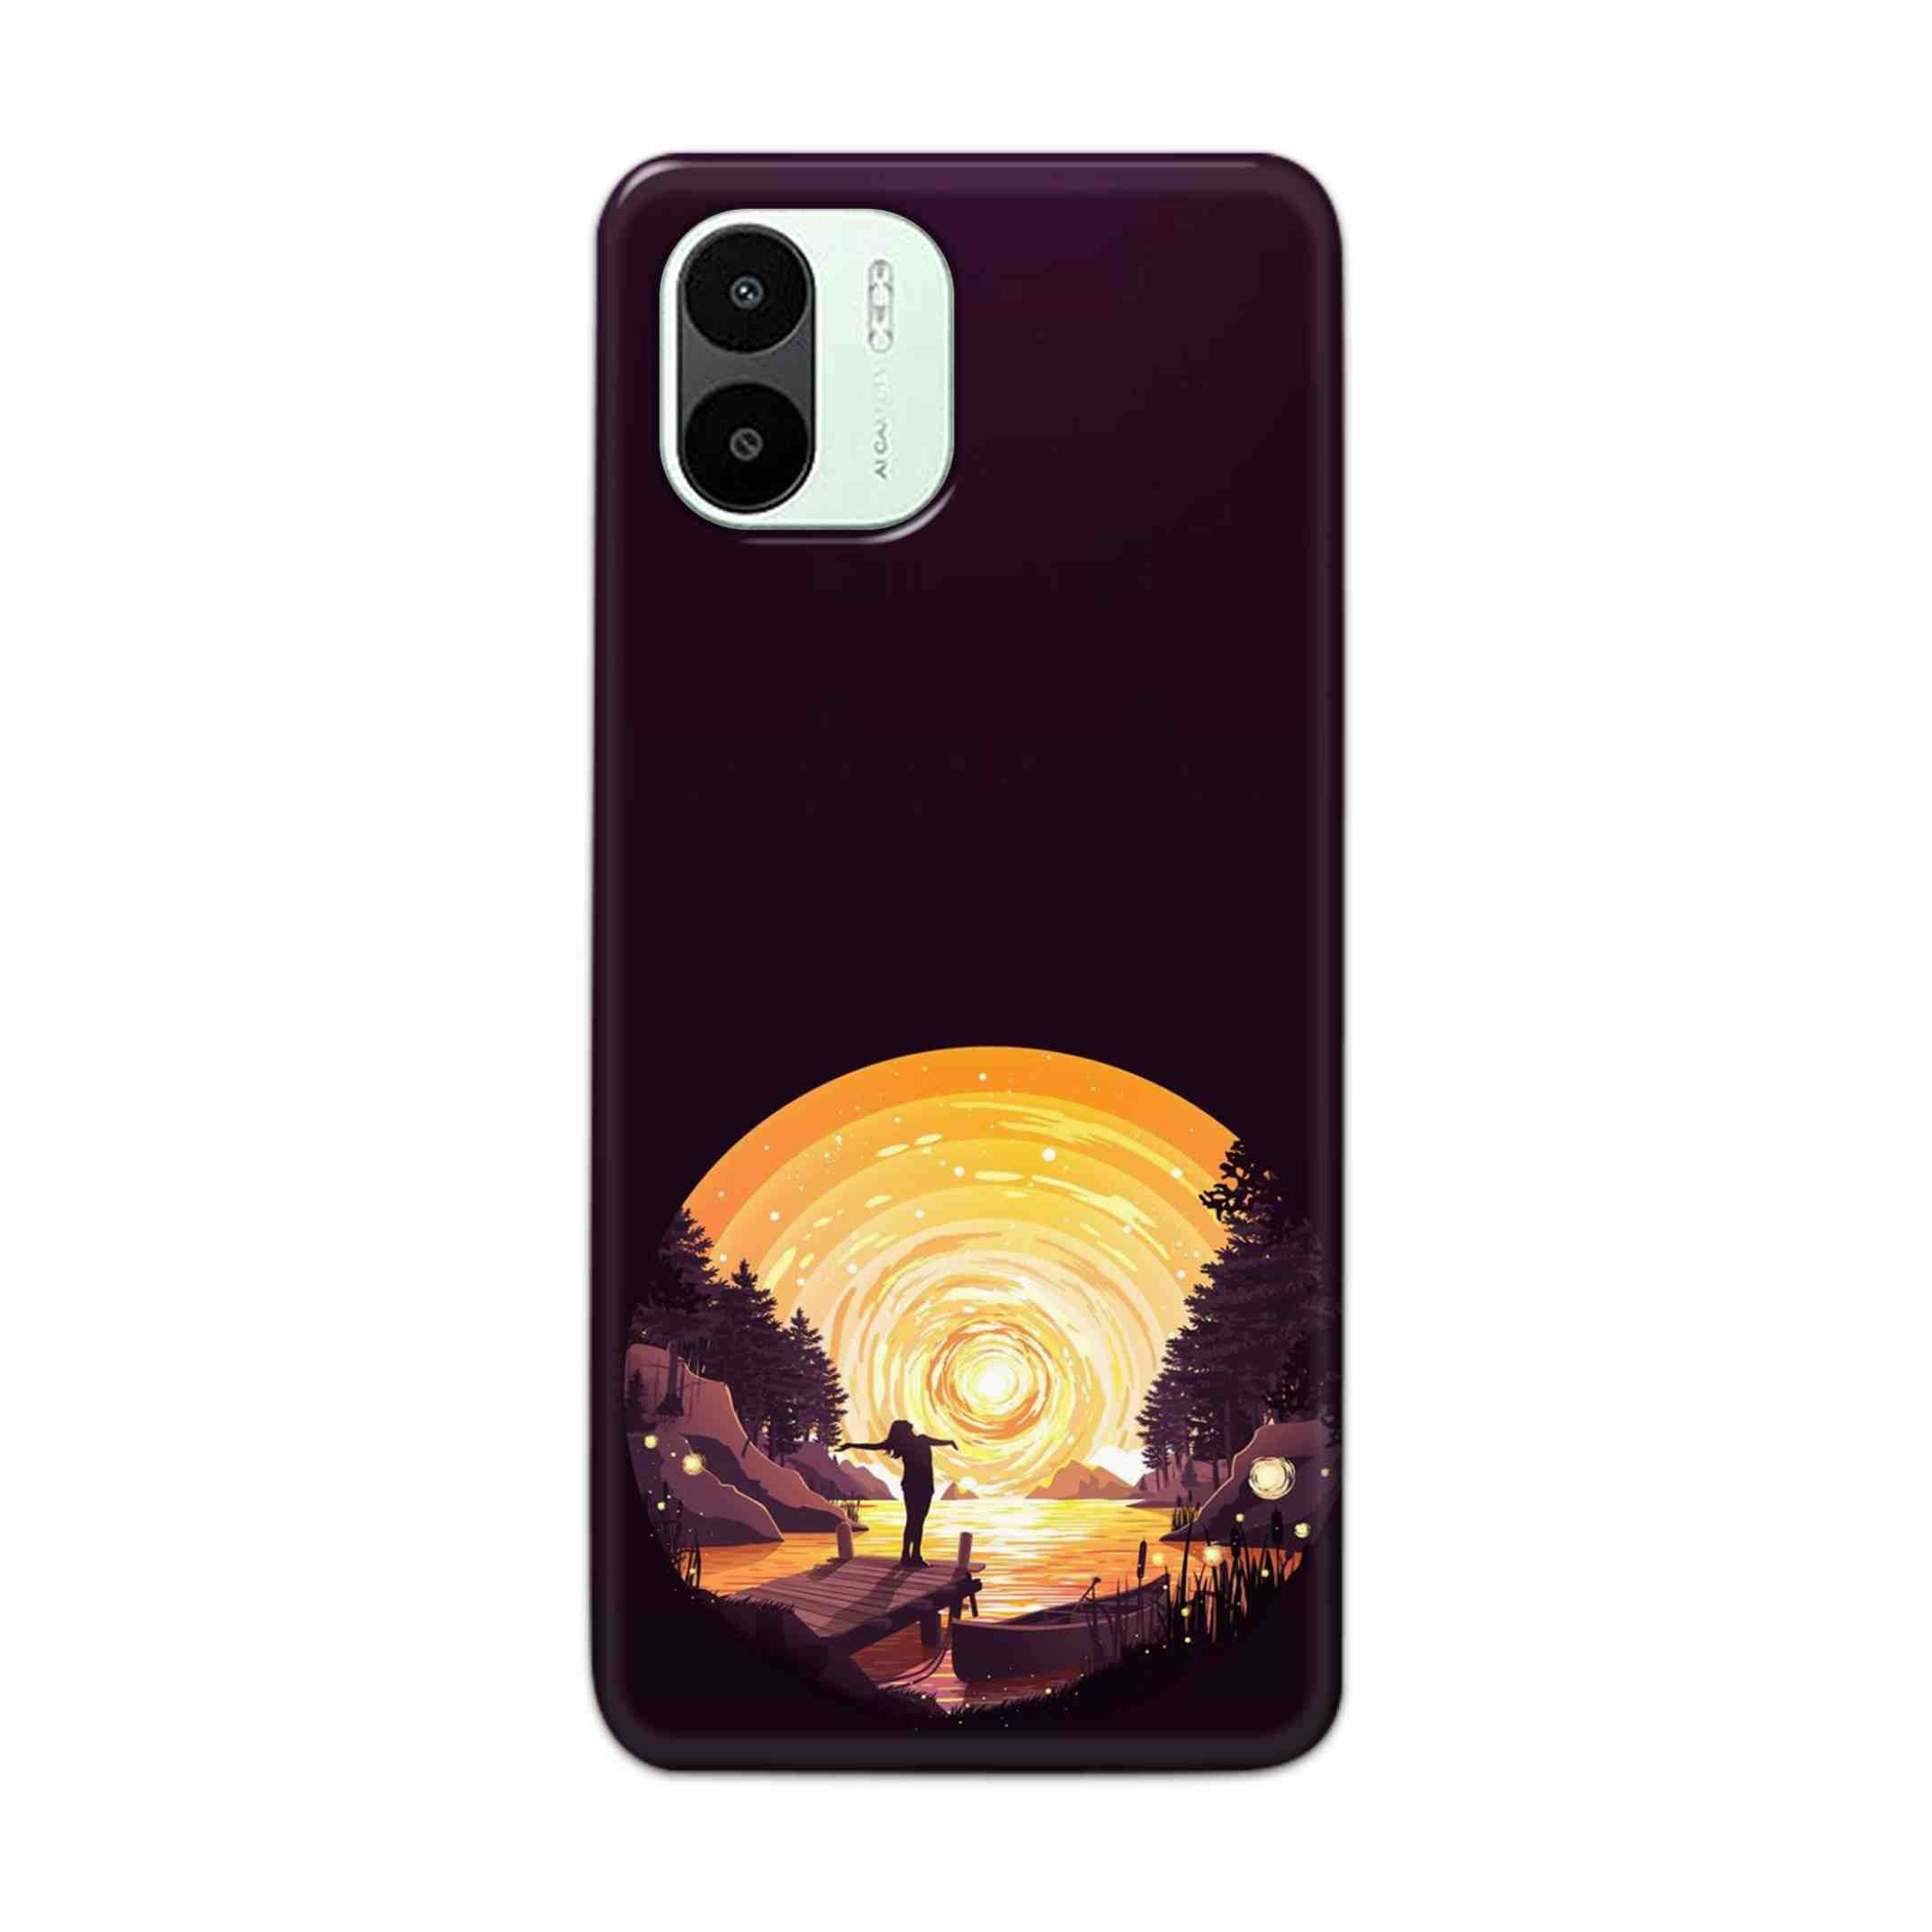 Buy Night Sunrise Hard Back Mobile Phone Case Cover For Xiaomi Redmi A1 5G Online